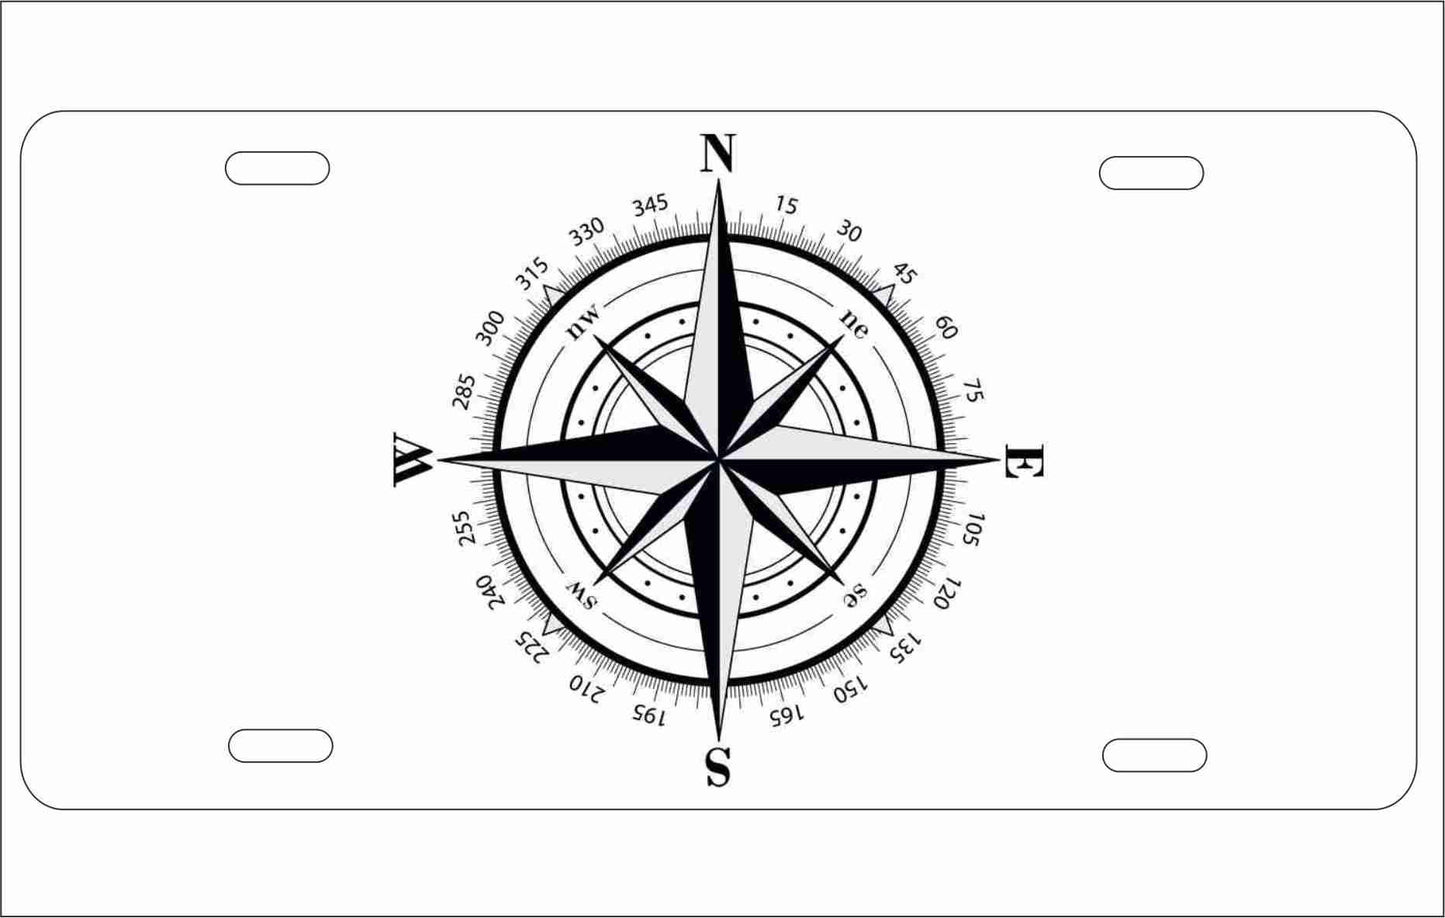 Compass rose novelty license plate decorative vanity aluminum sign